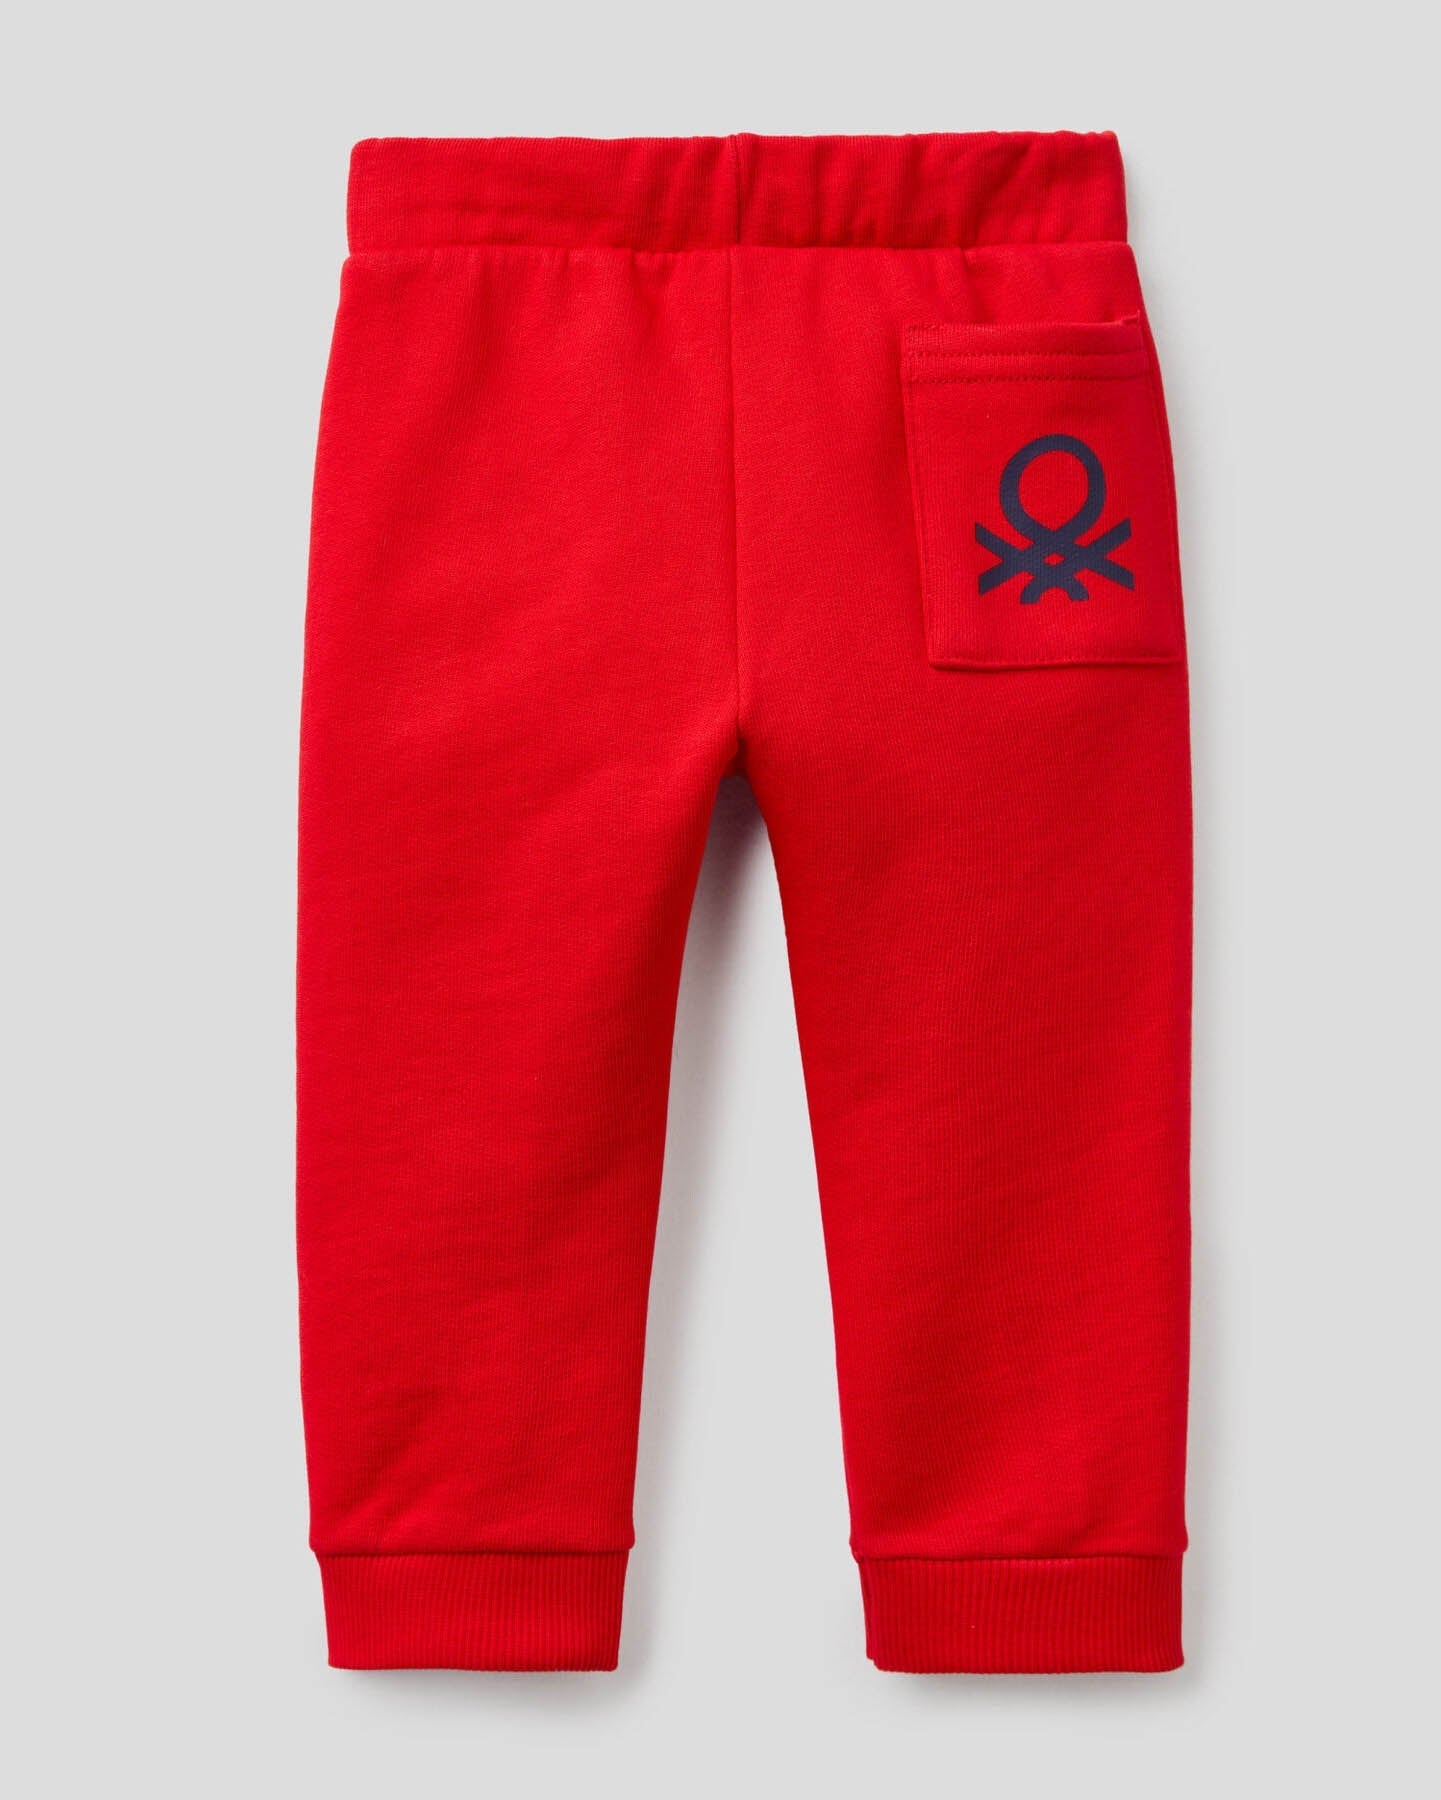 Red Trouser